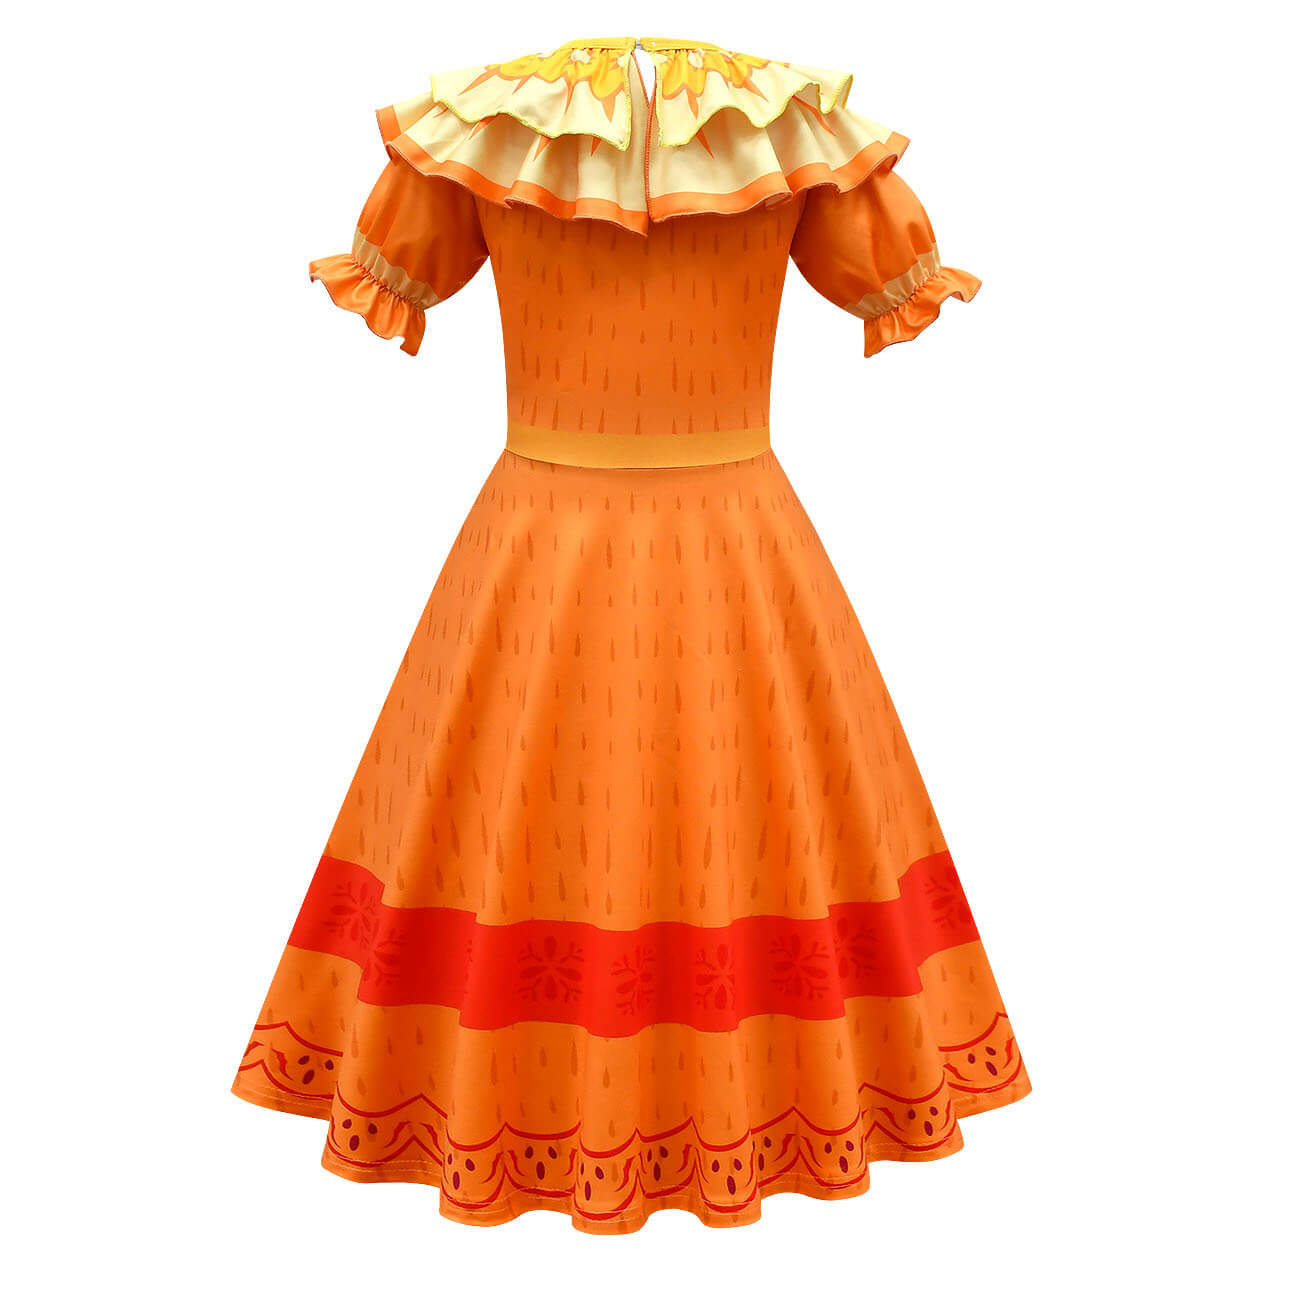 Girls Pepa Dress Fancy Pepa Madrigal Party Cosplay Outfit for Kids Halloween Costume